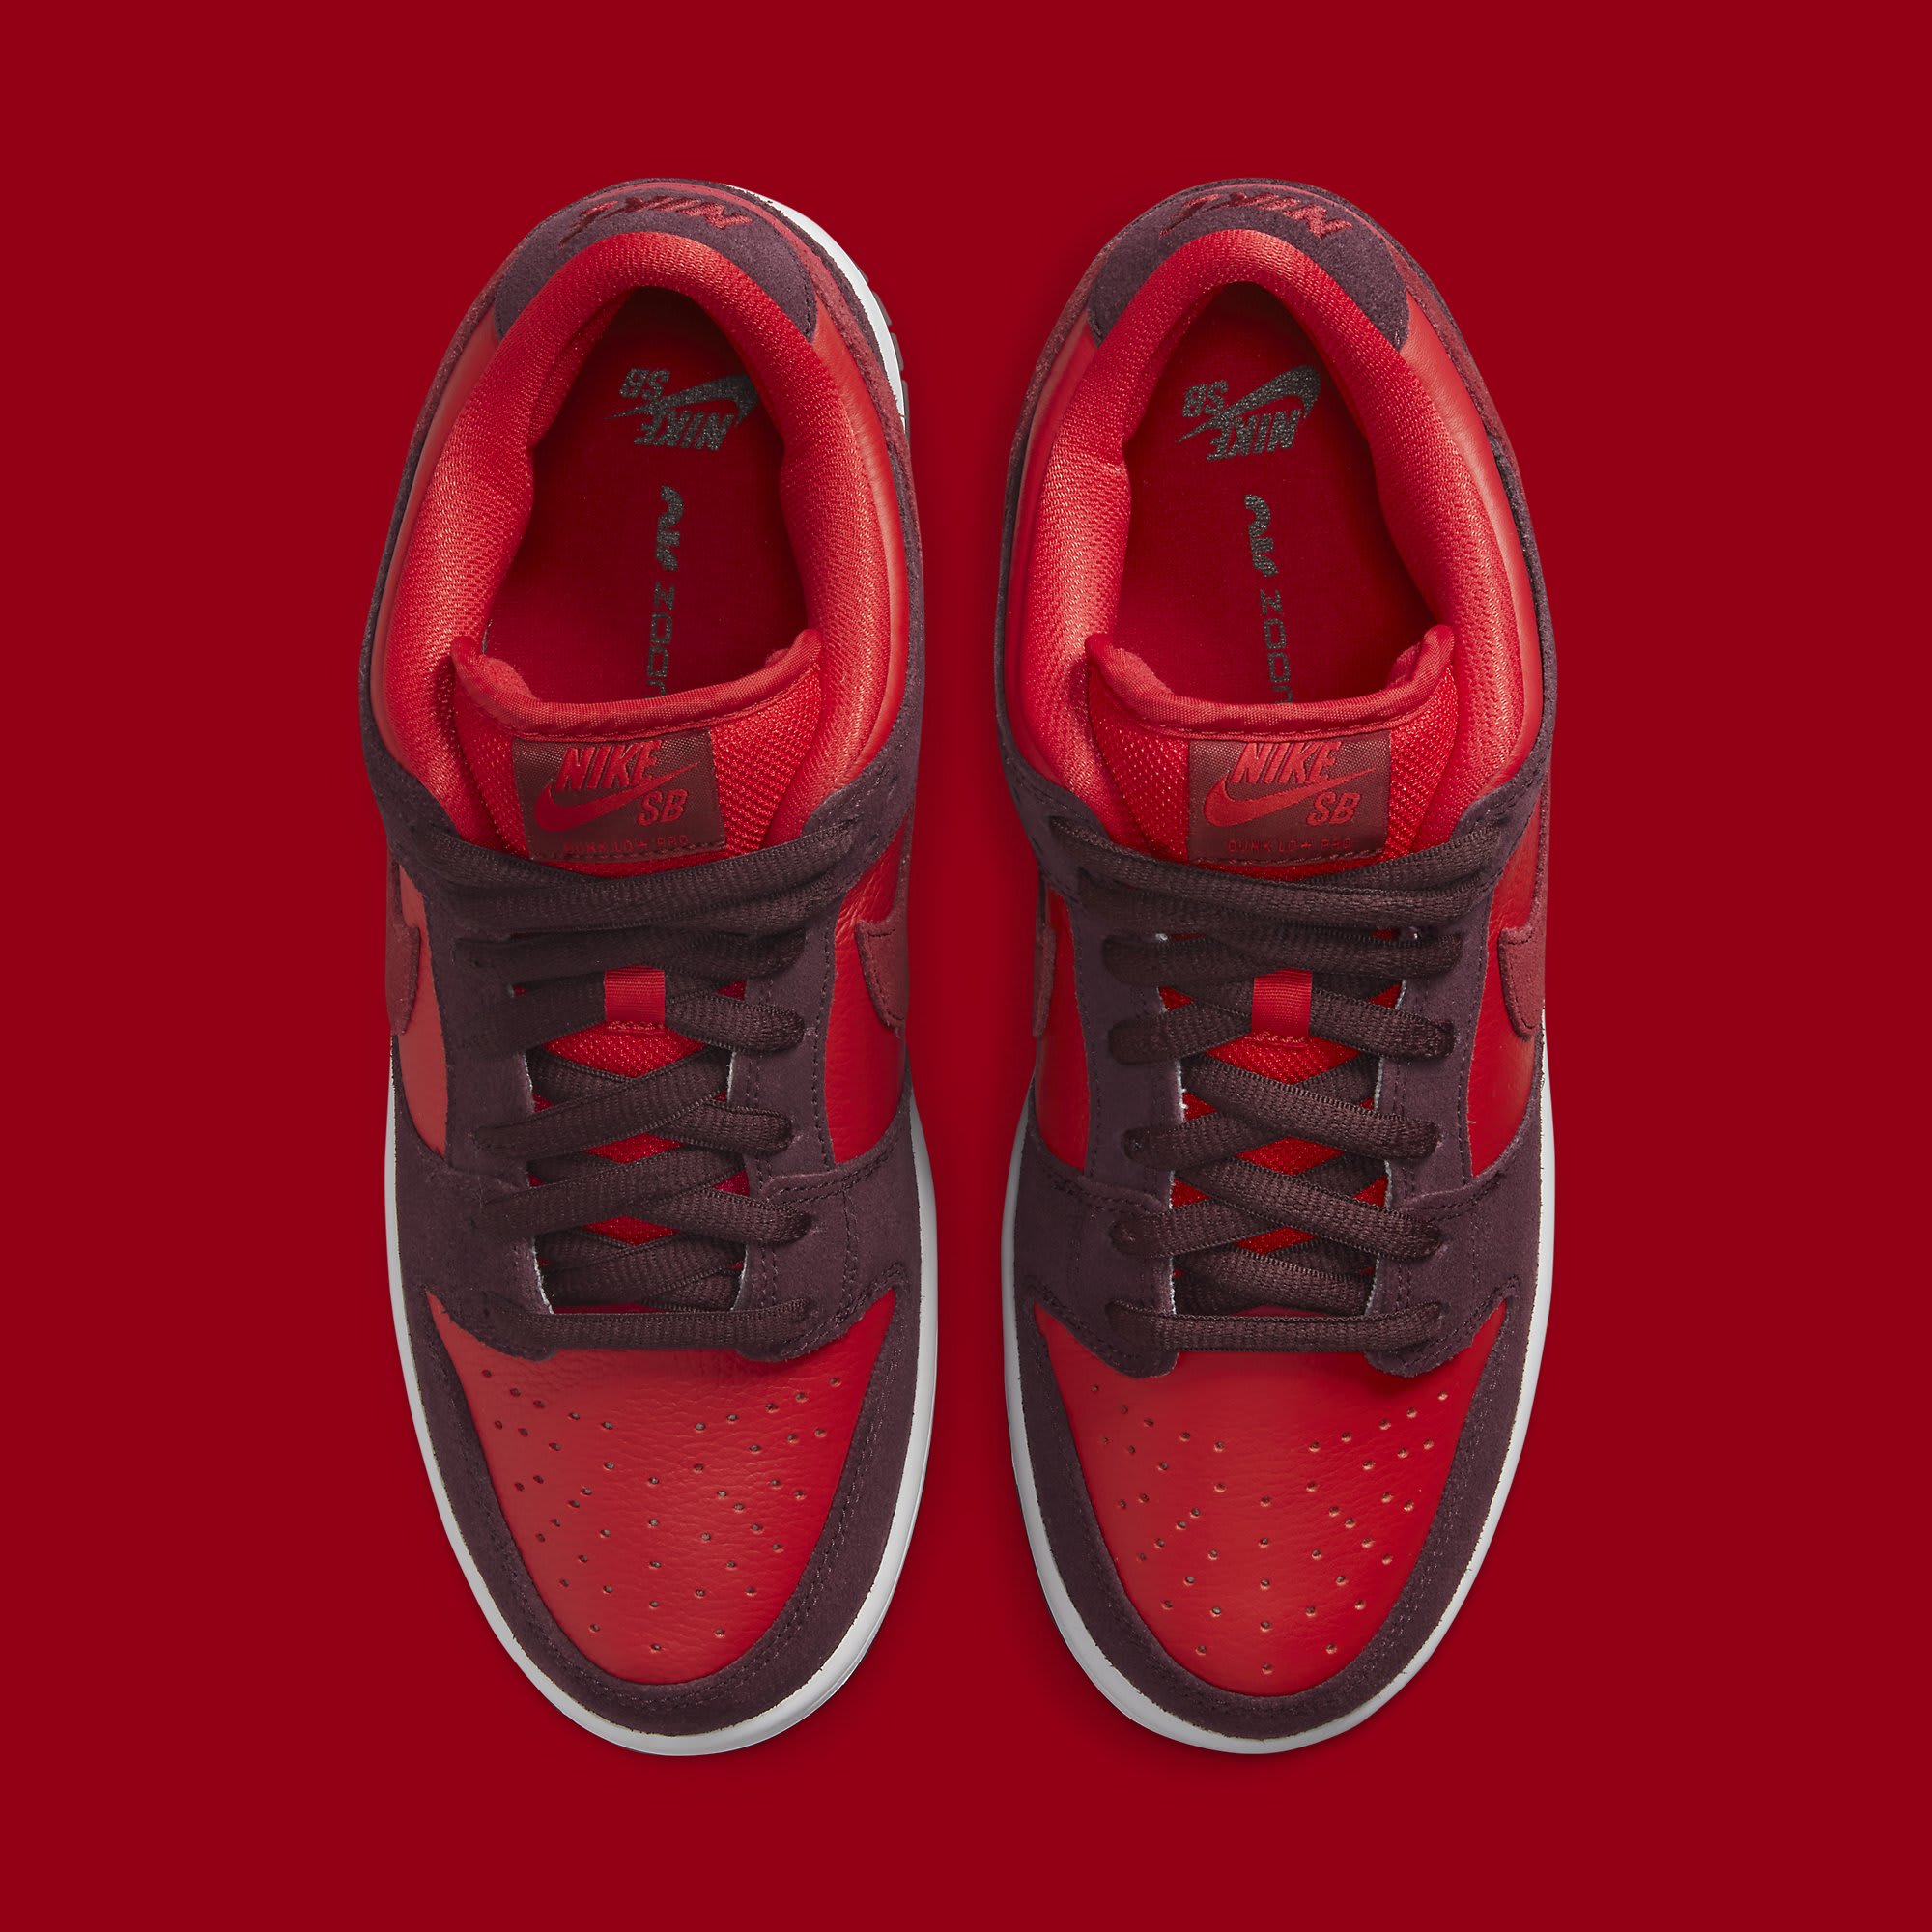 This Nike Sb Dunk Low Is Cherry Flavored | Complex